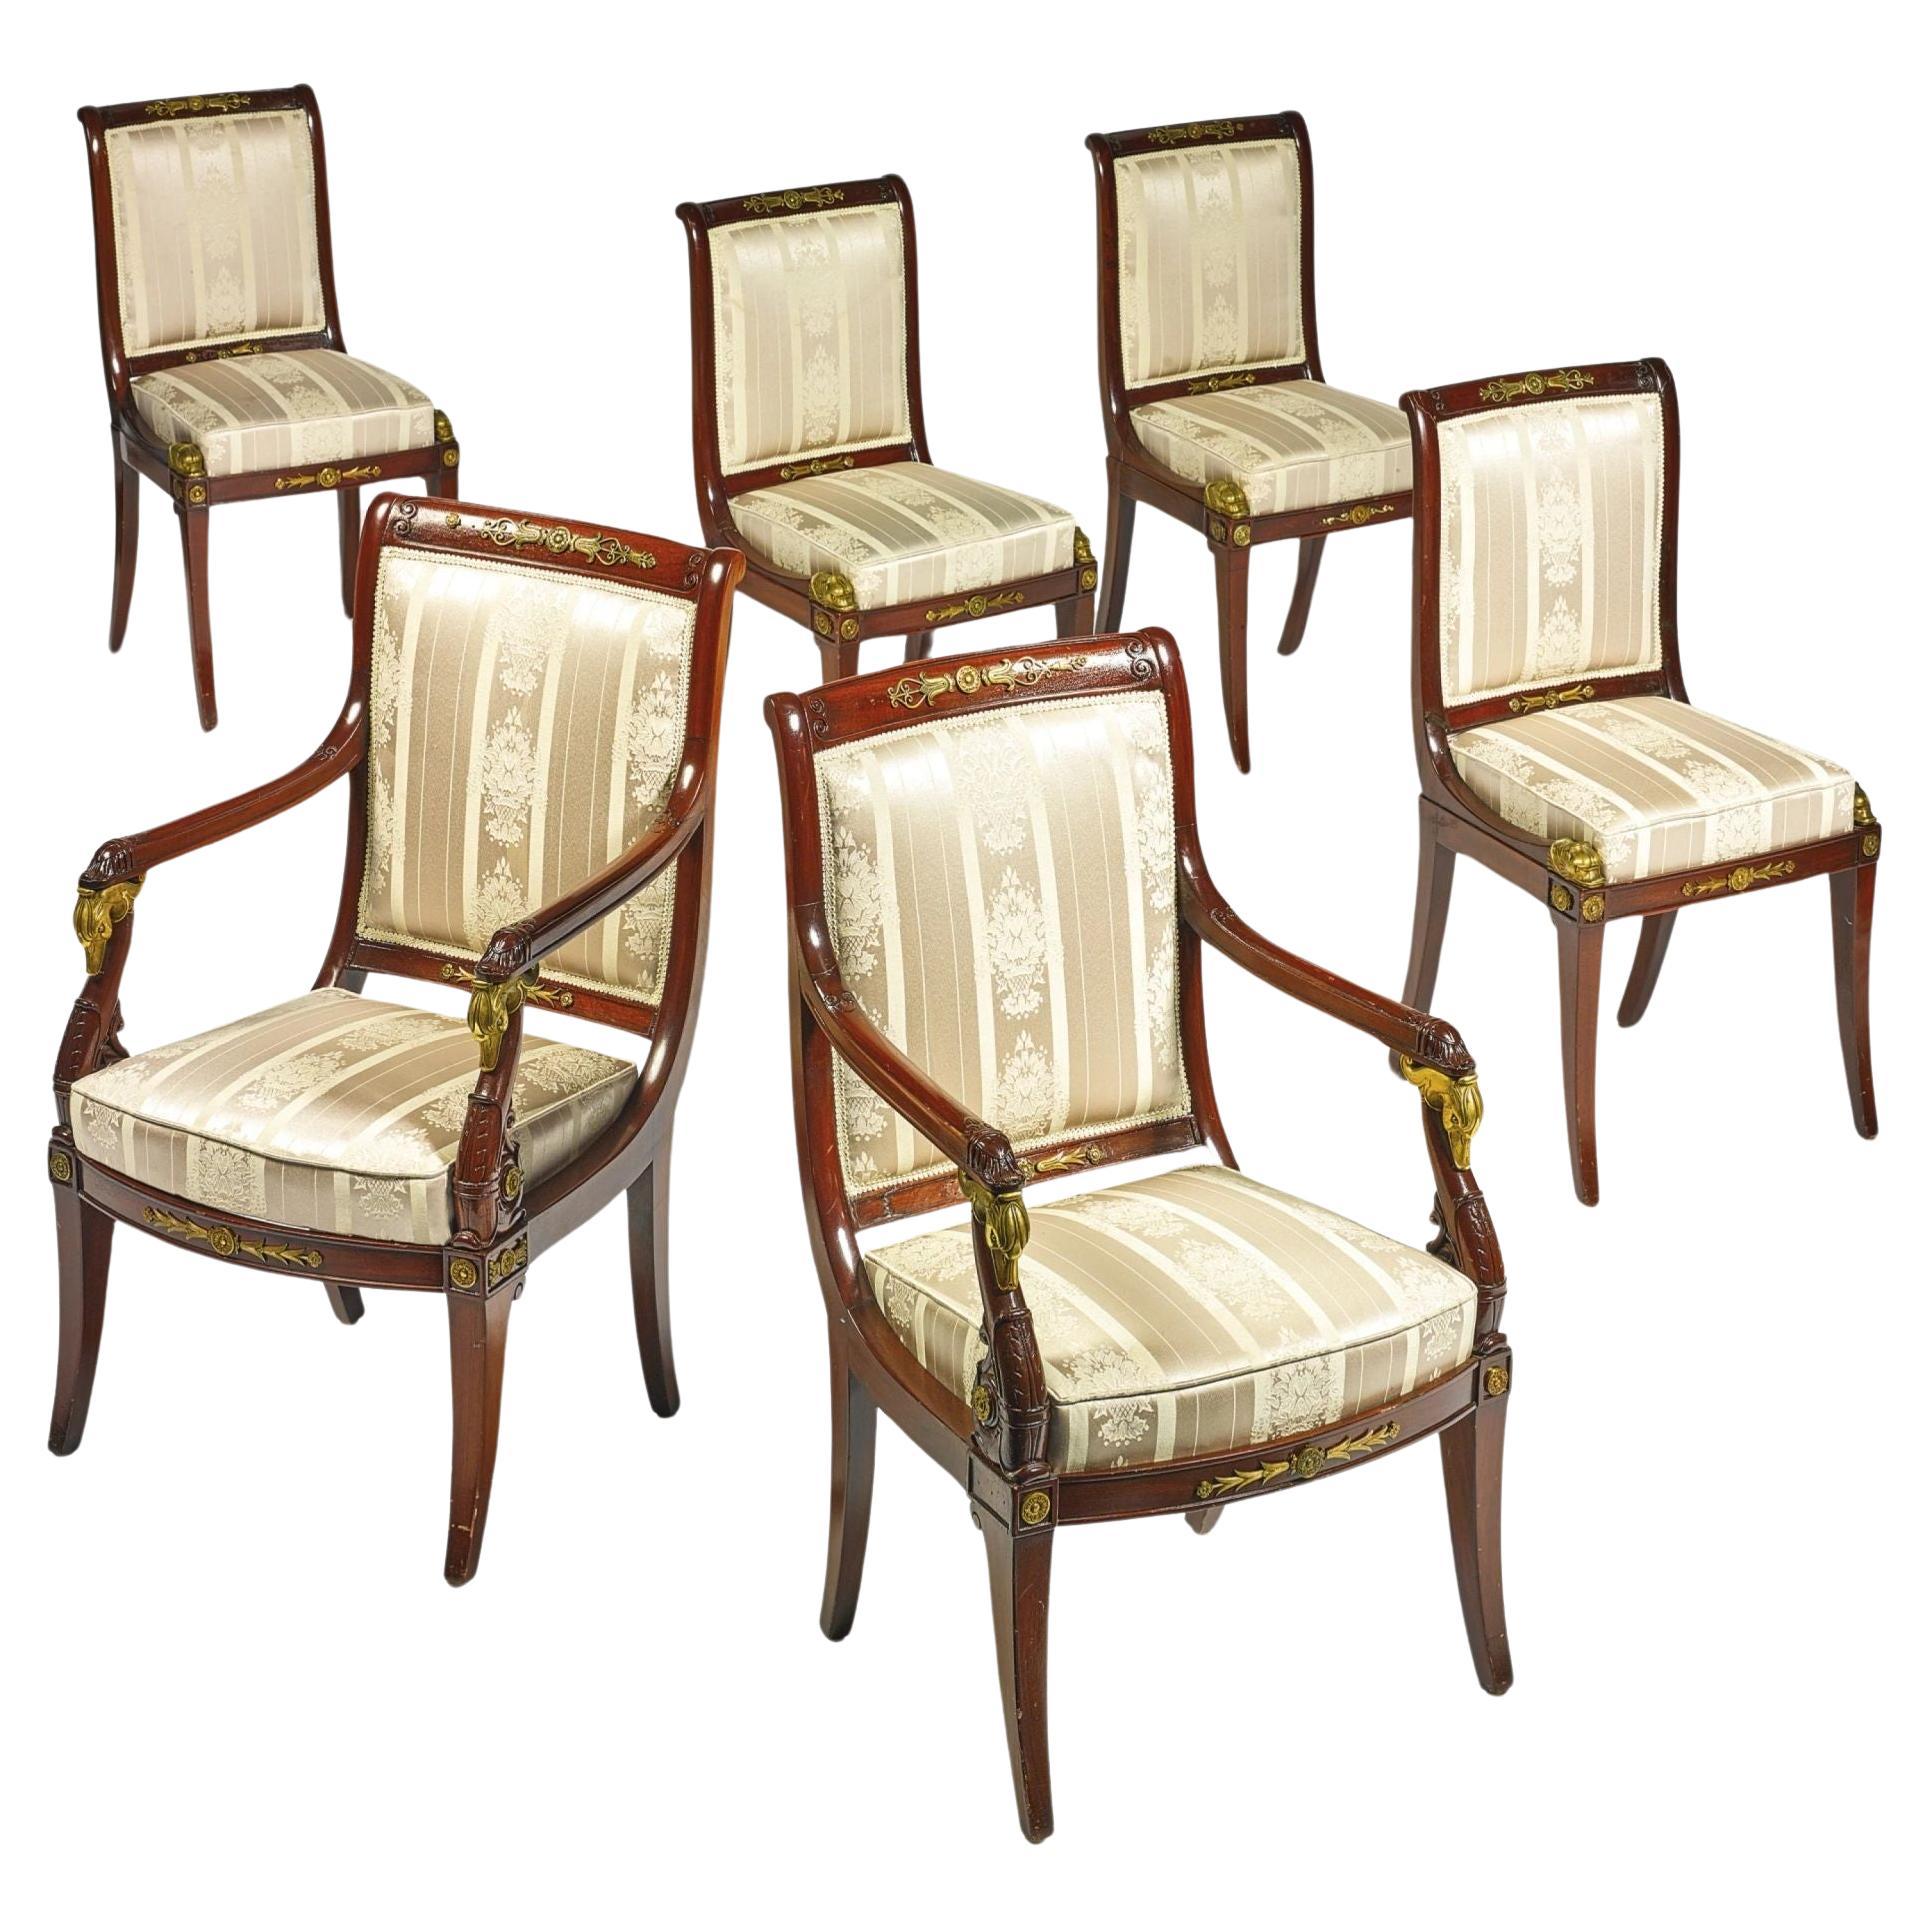 Russian Neoclassical, Six Dining Chairs, Mahogany, Bronze, Fabric, Sothebys Prov